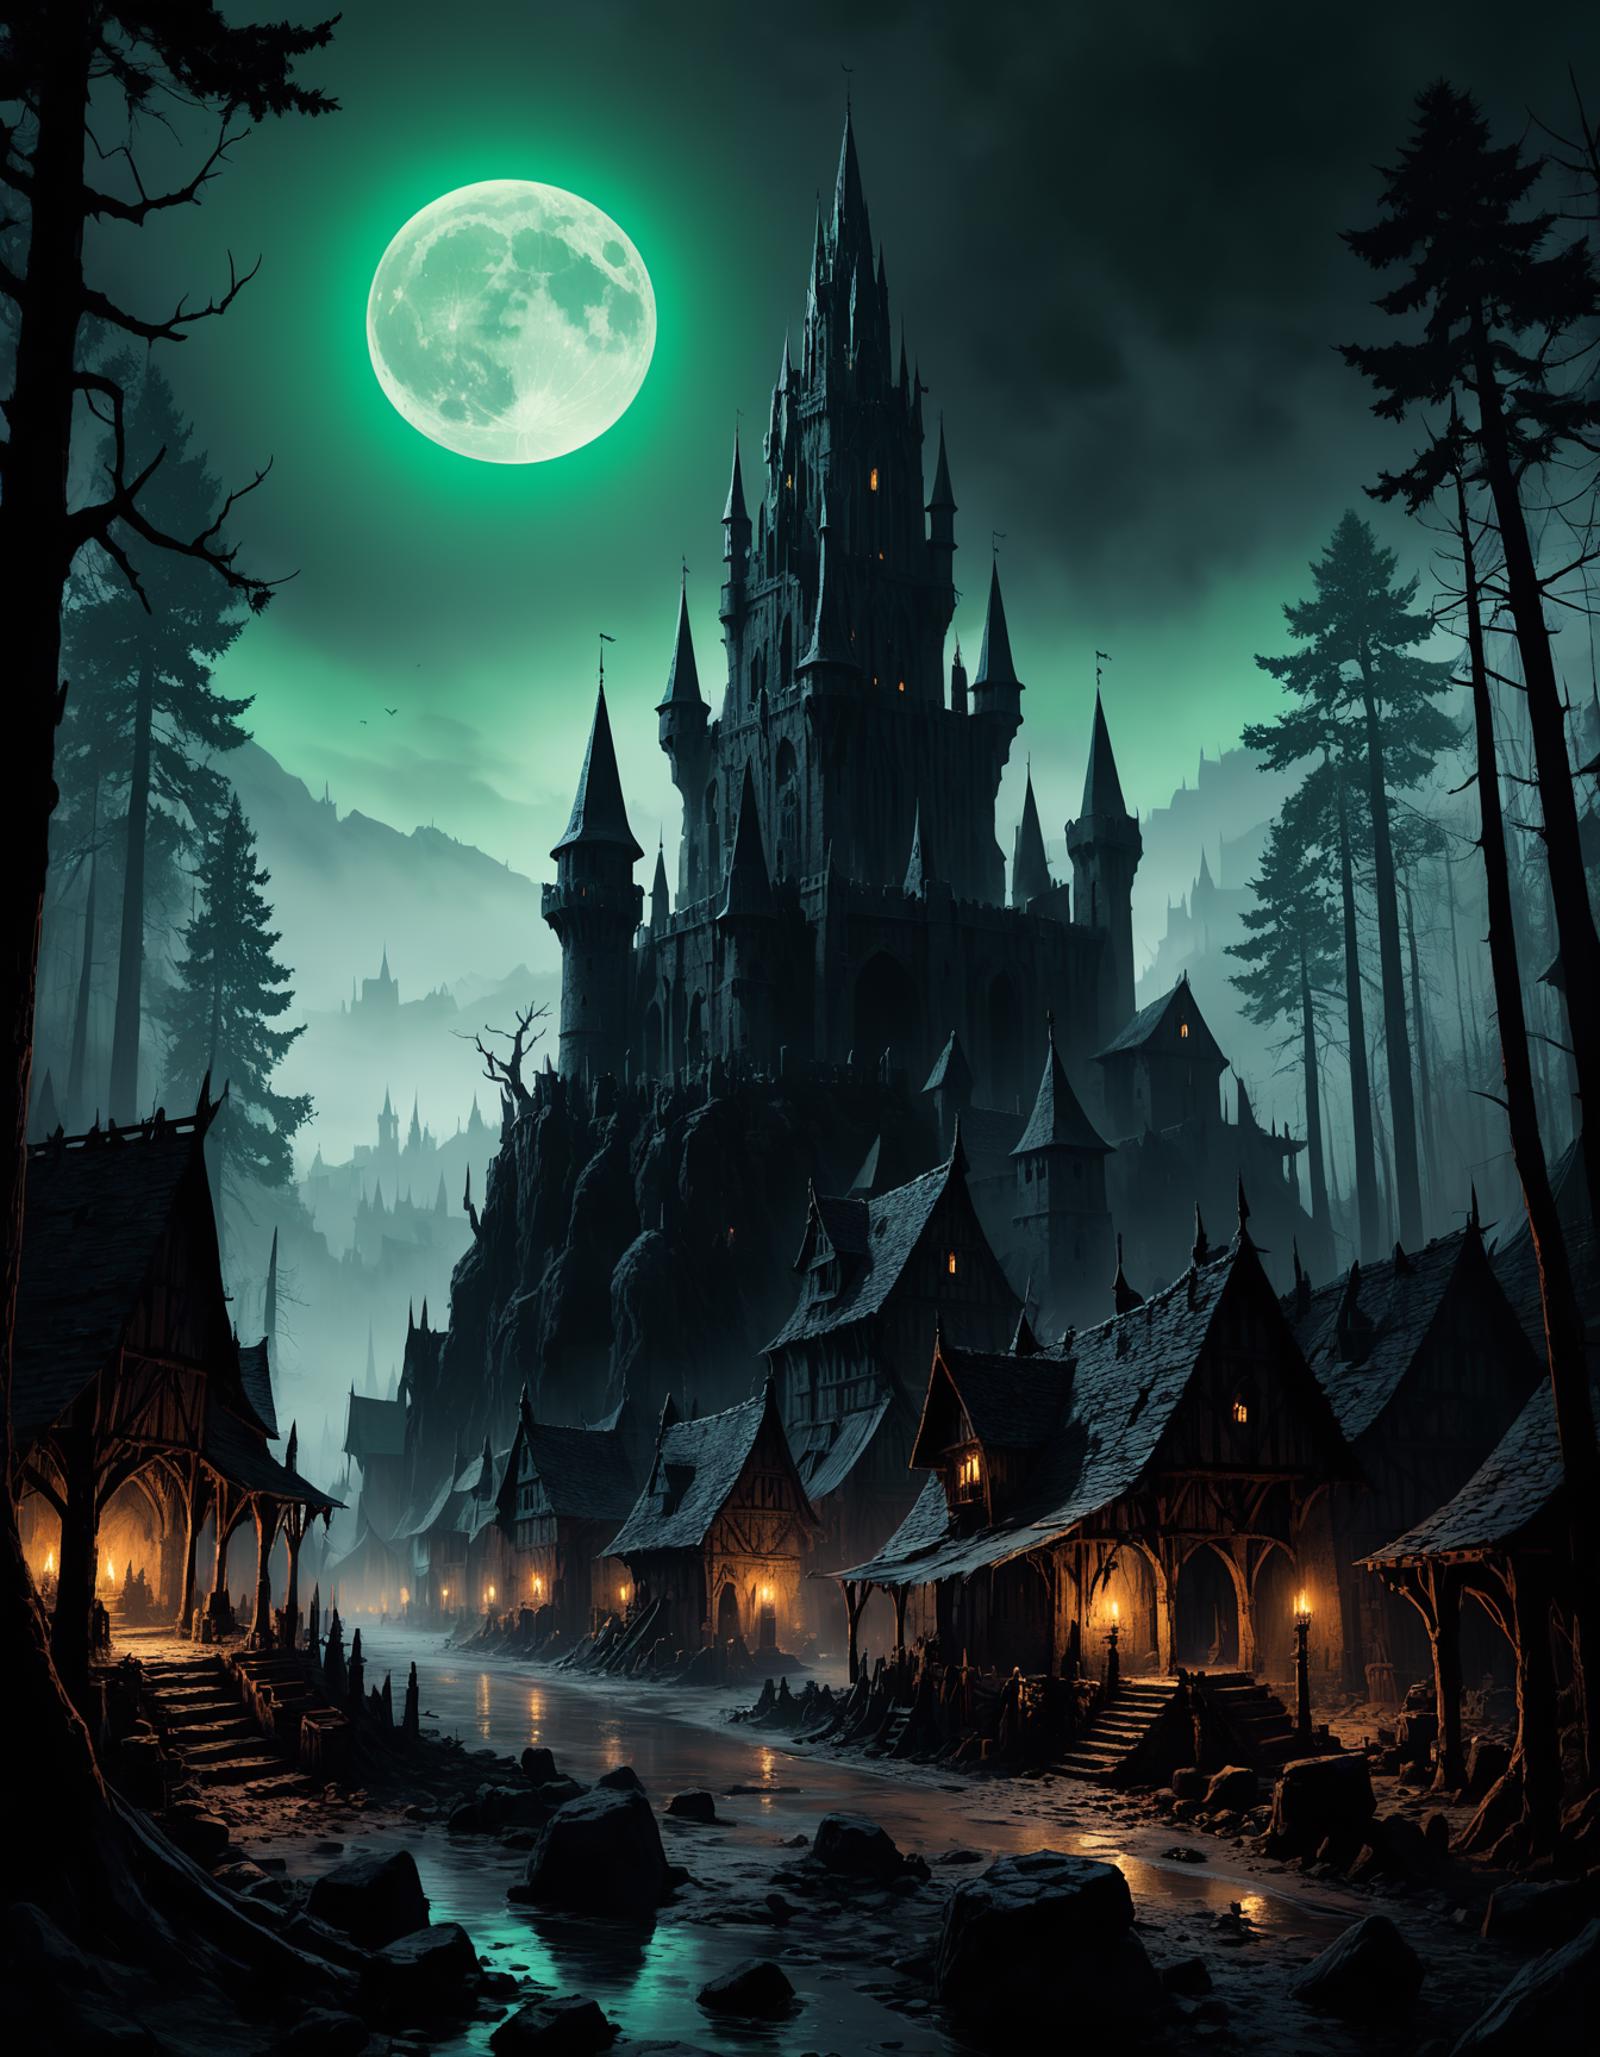 A dark and eerie castle with a full moon in the background.